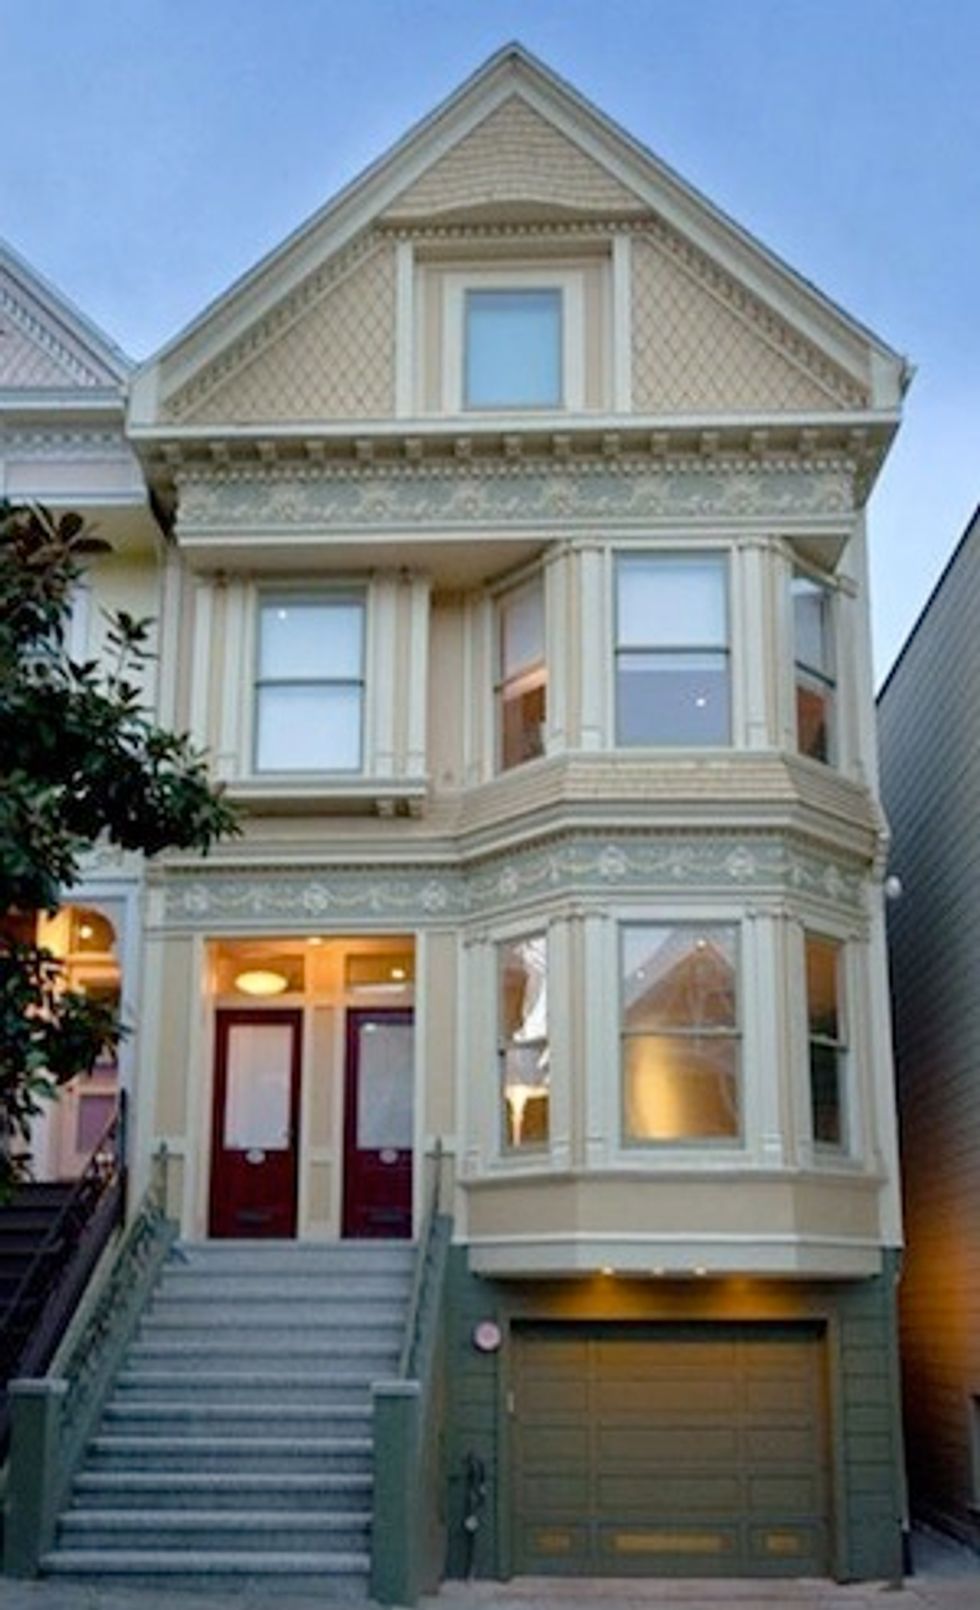 Real Estate Report: Pared-Down Modern in a Lower Haight Victorian Shell, $1.15M